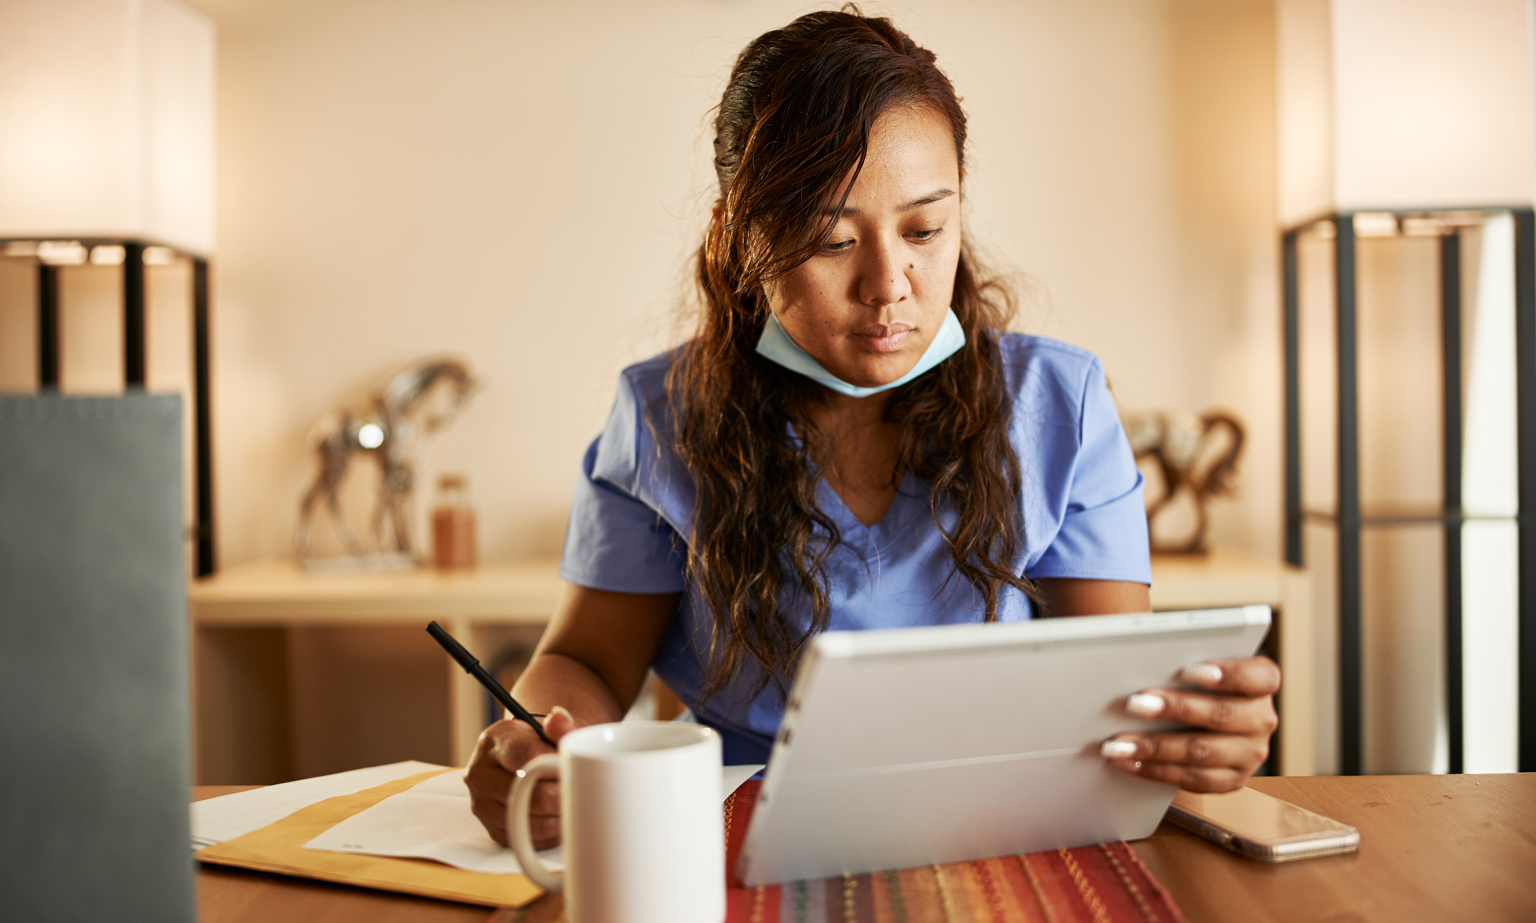 Filipina nurse working from home doing paperwork and using tablet